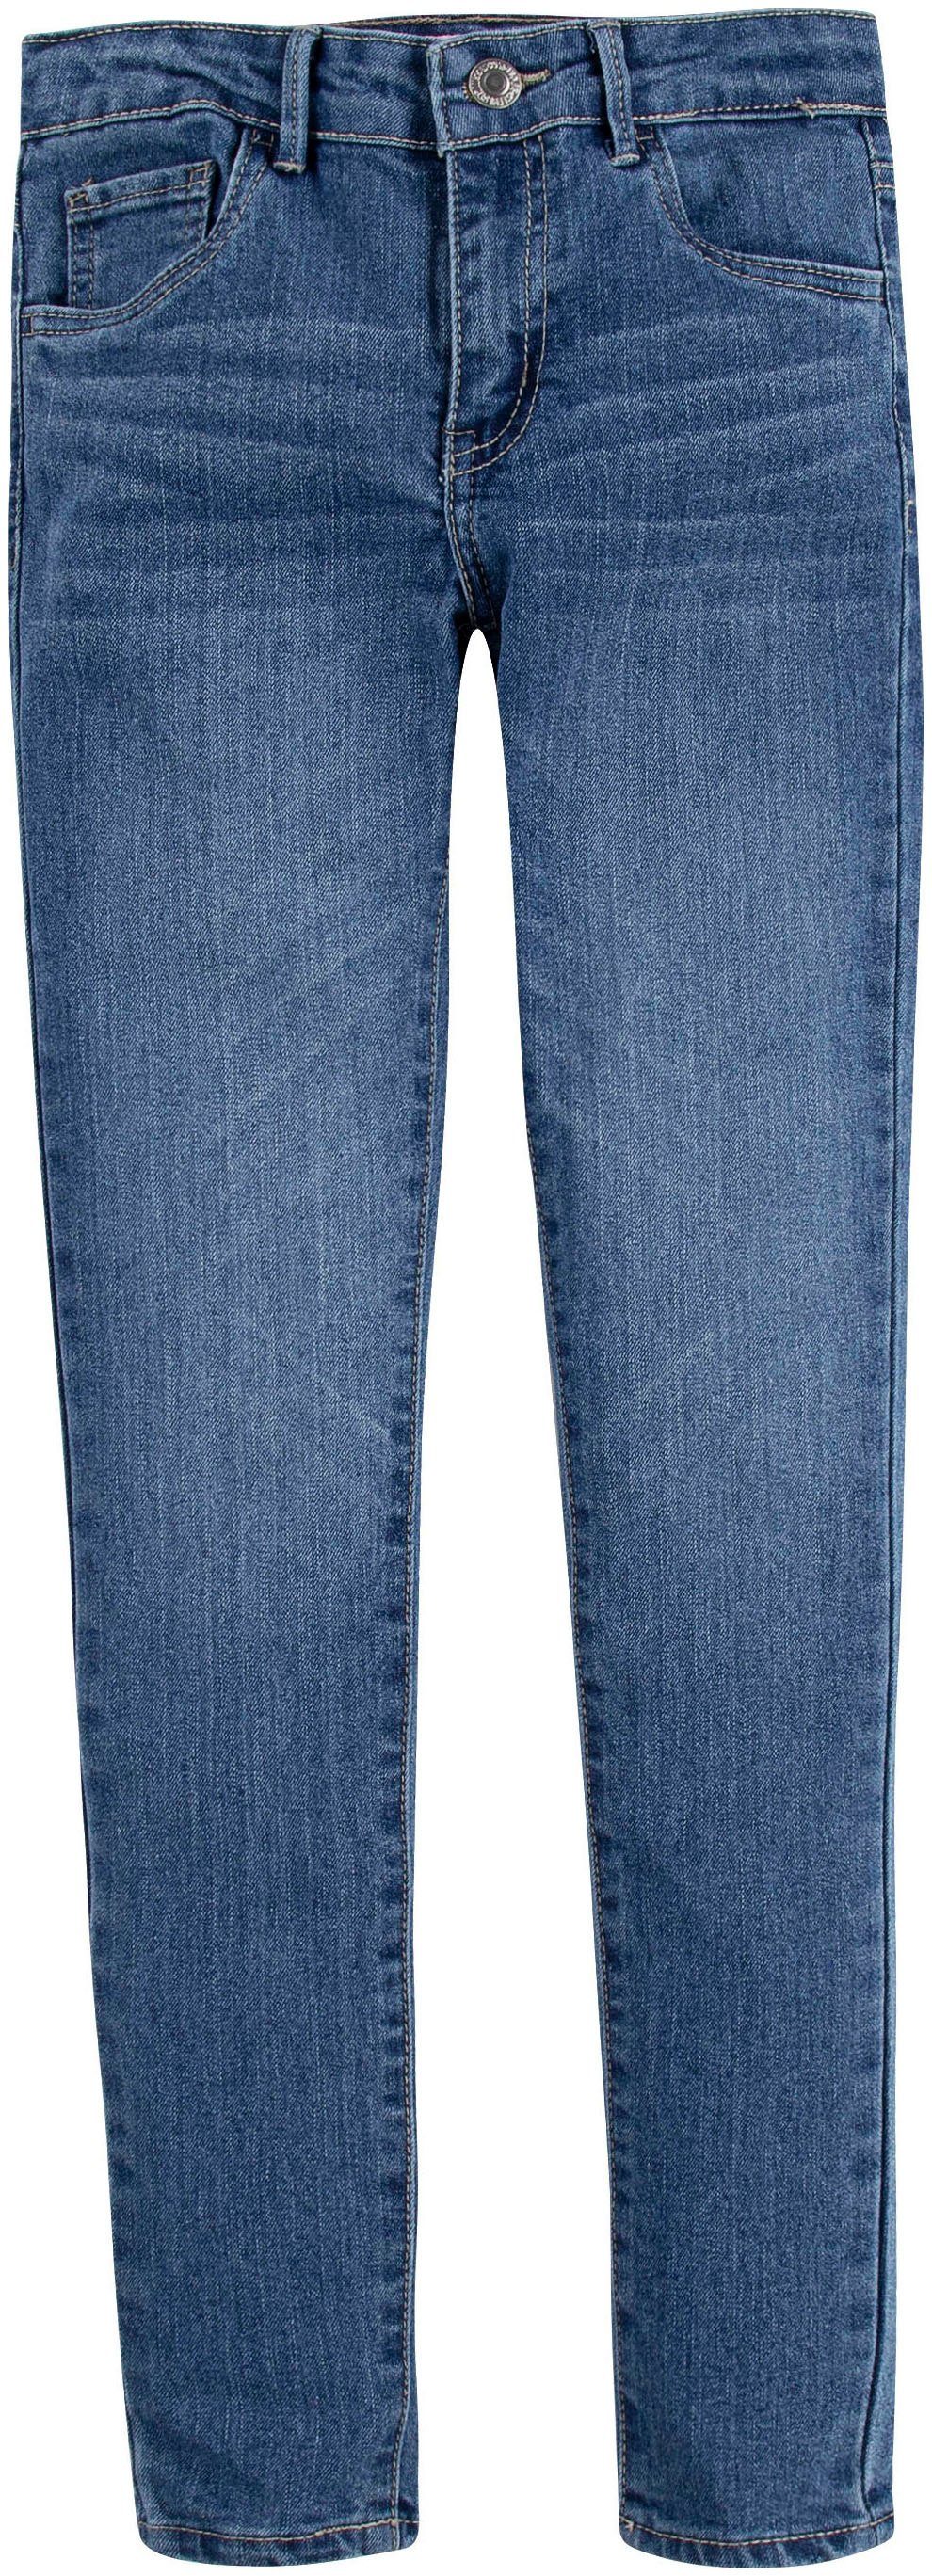 GIRLS 710™ used Stretch-Jeans JEANS Levi's® Kids SUPER FIT mid for blue SKINNY